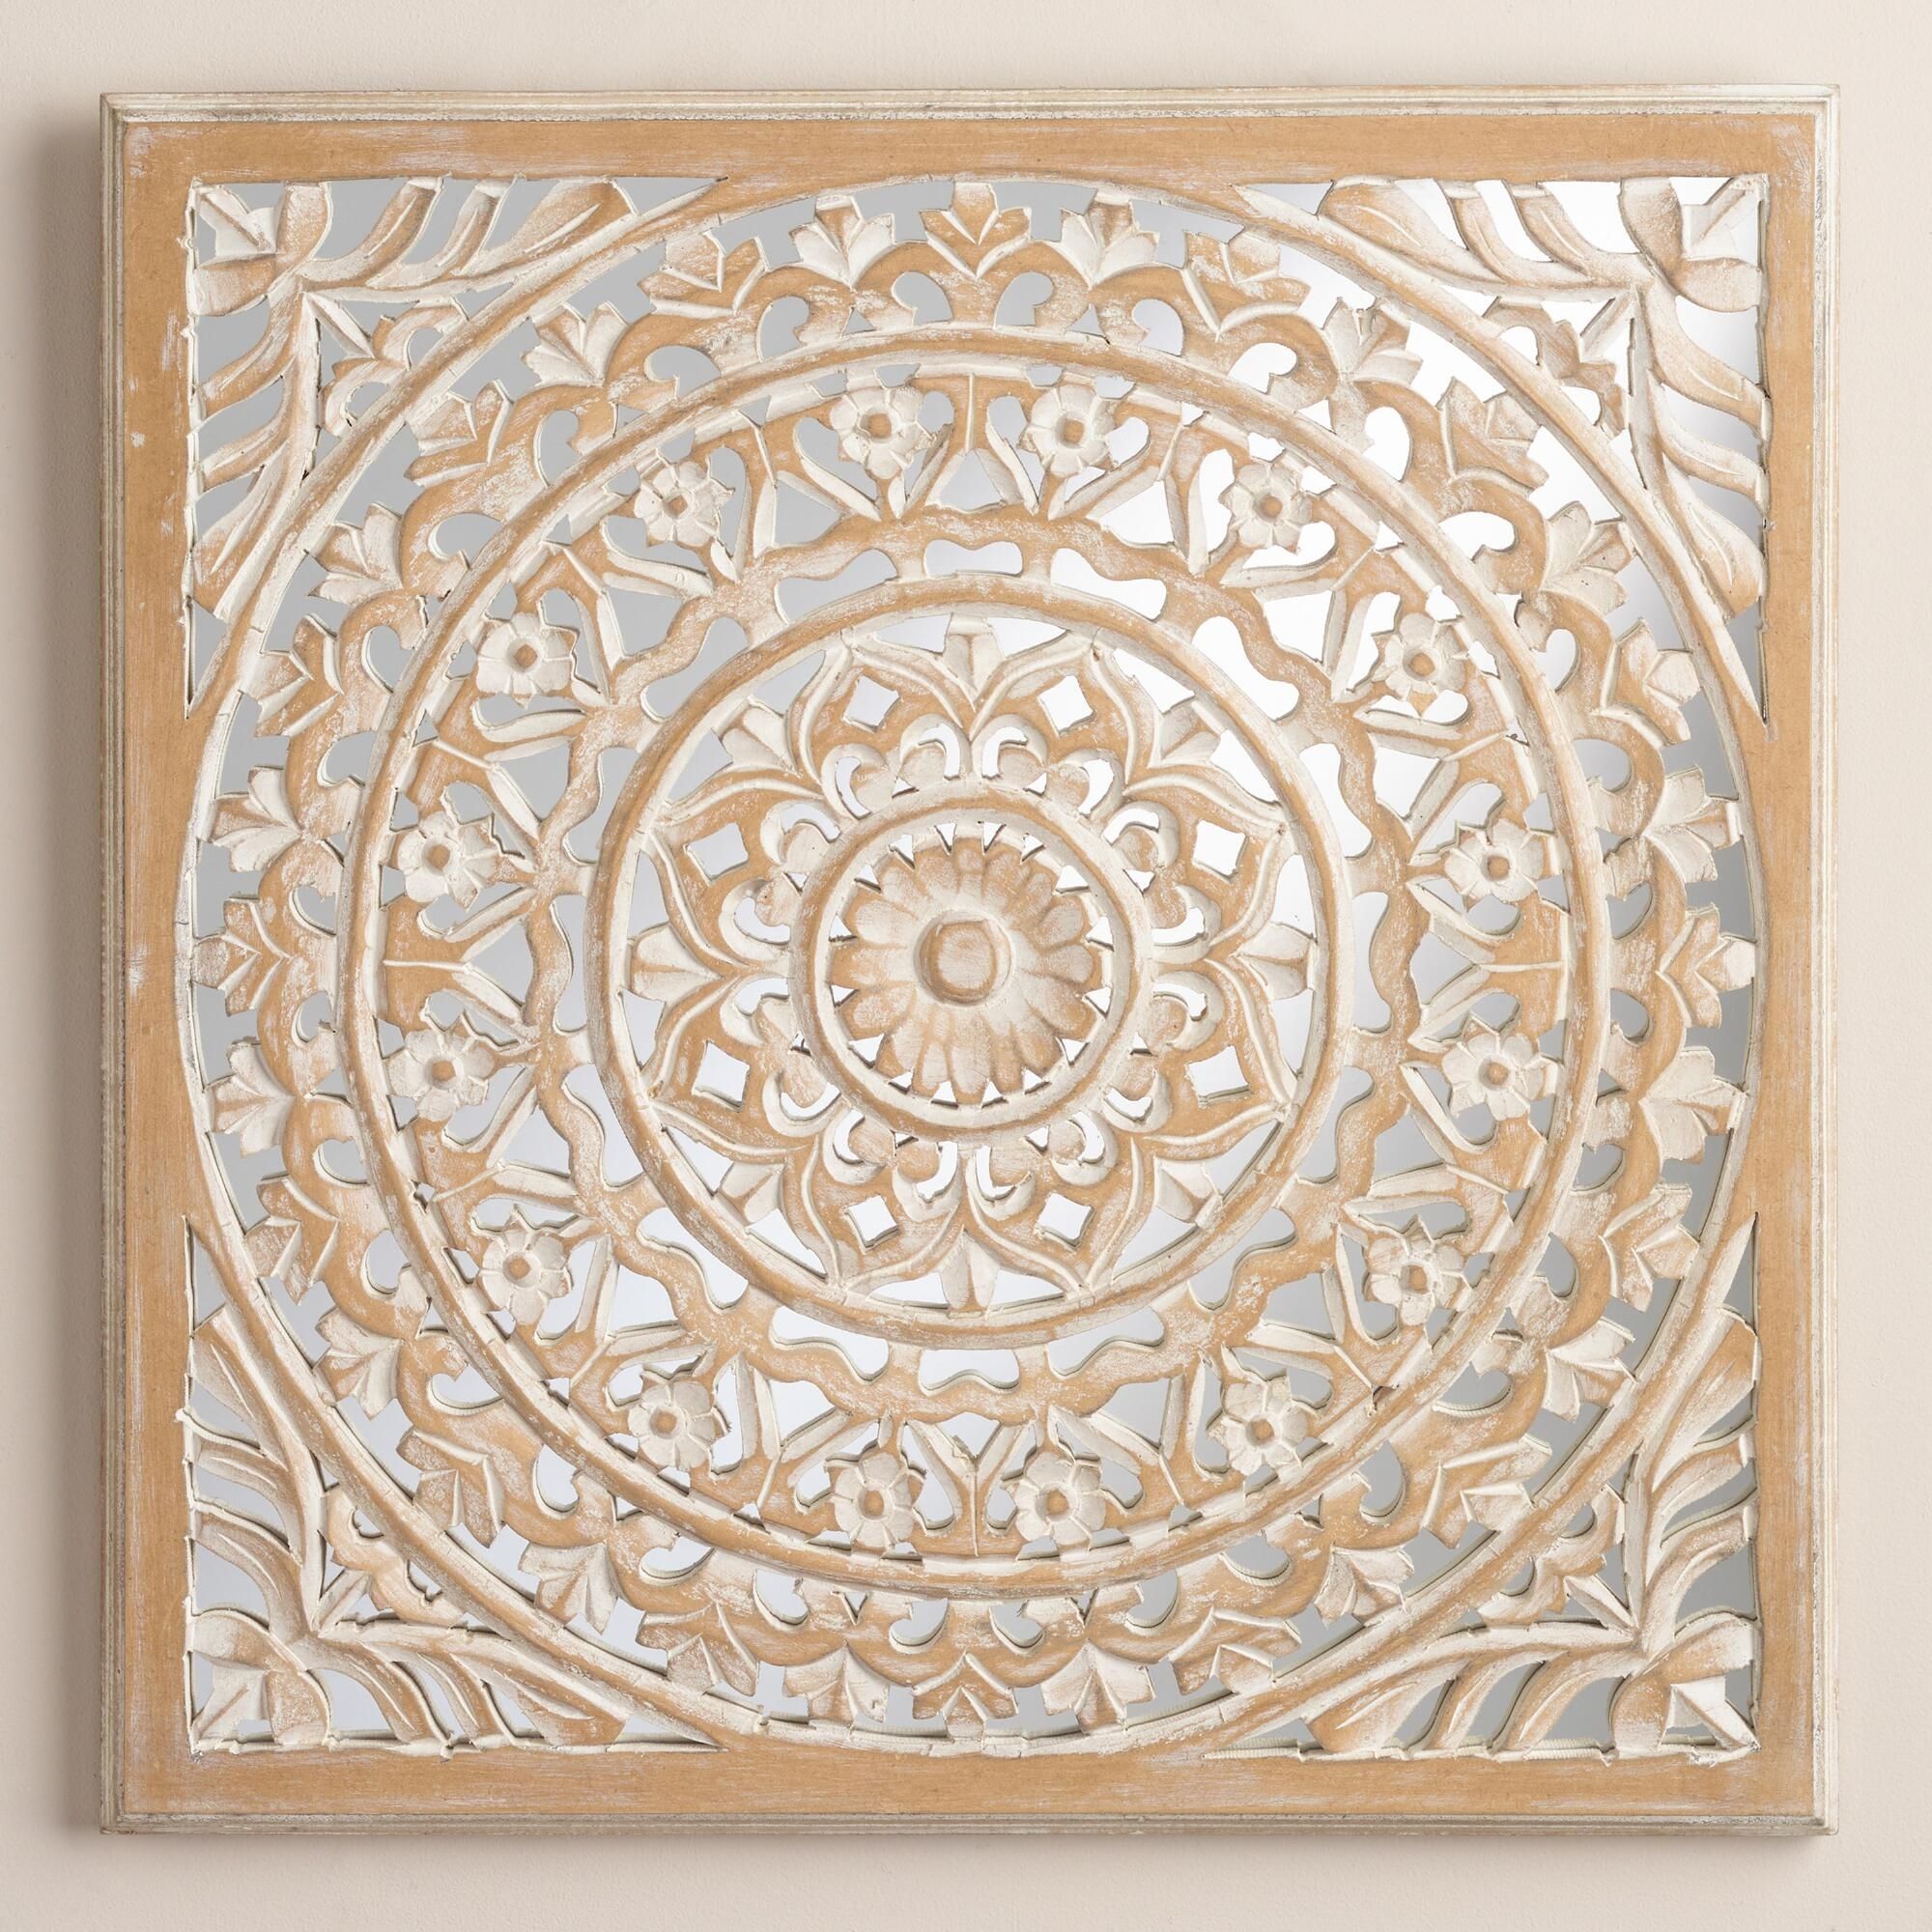 Wood Medallion Wall Art Stickers Scrolled Metal Wall Medallion Decor With Regard To Medallion Wall Art (View 12 of 20)